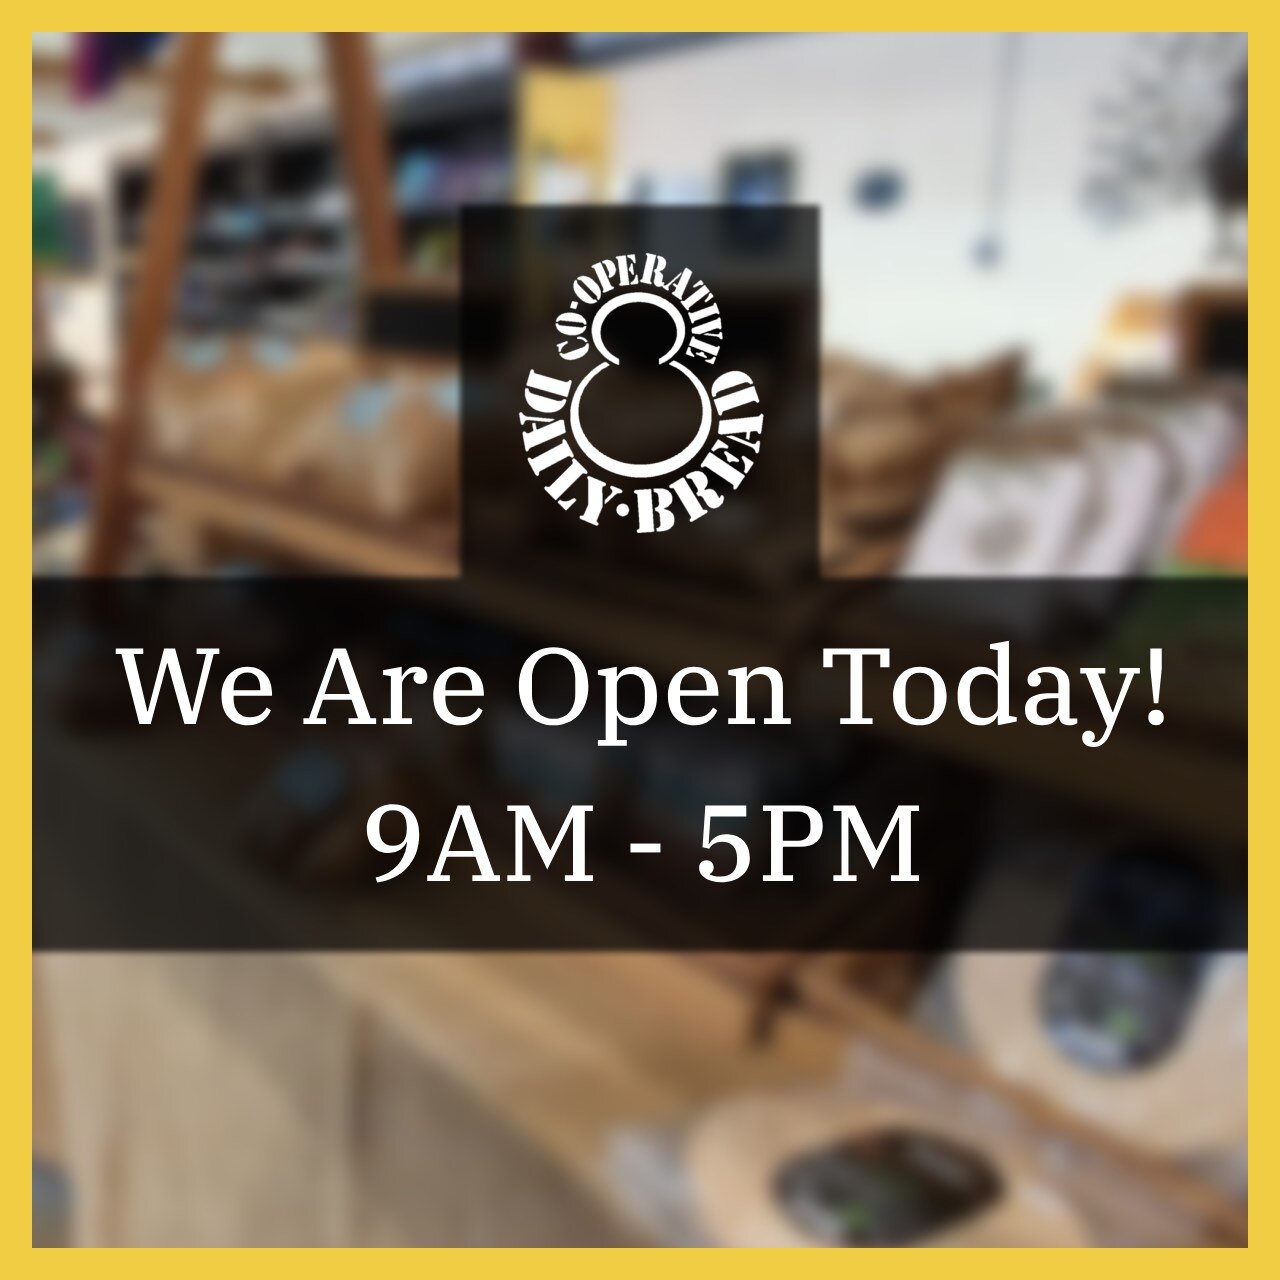 A warm welcome awaits you this weekend in our shop and cafe. We will be closing a little earlier than usual again due to staff illness, and we apologise for any inconvenience this may cause!